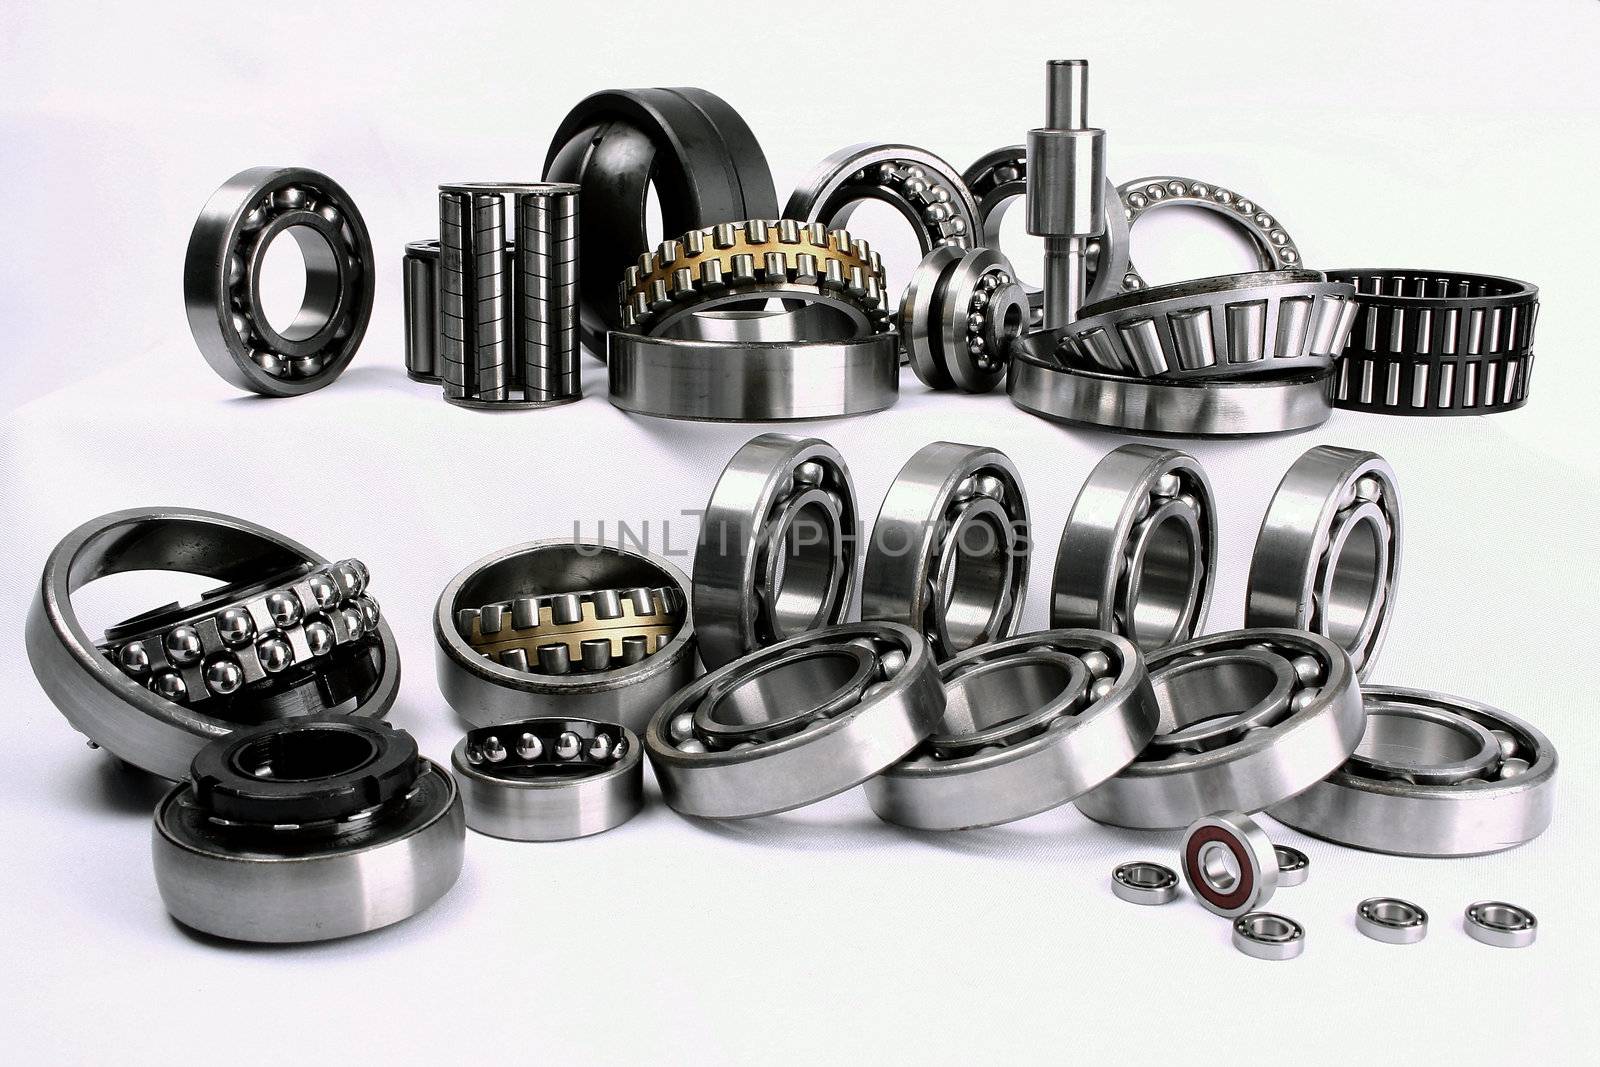 Bearings have the important role in modern manufacture